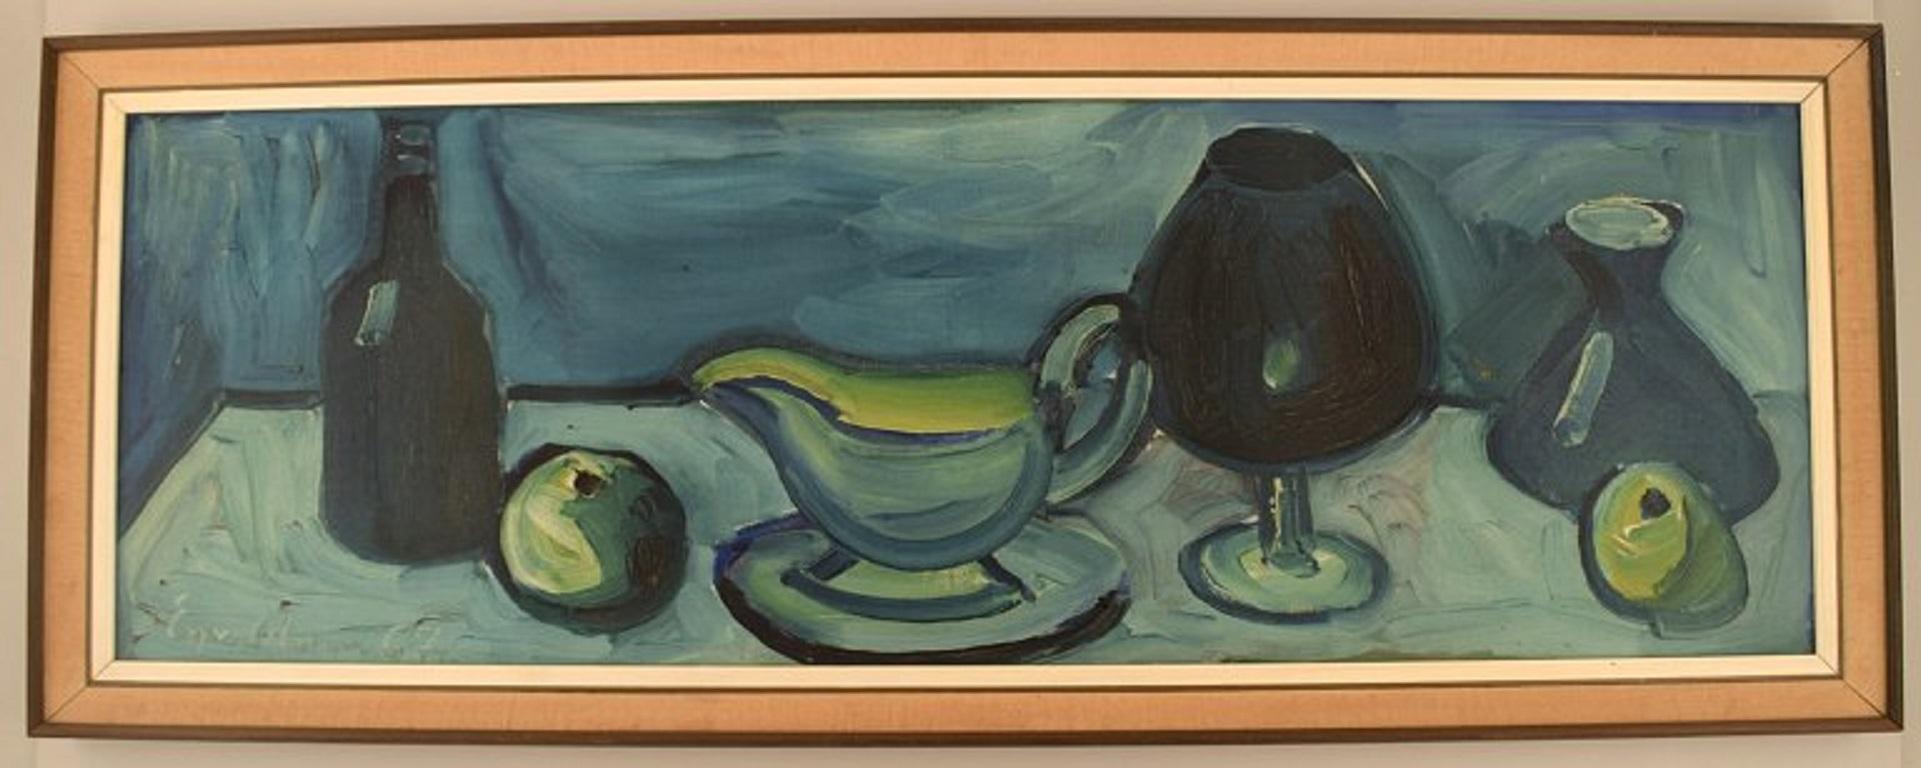 Eyvind Olesen (1907-1995), Denmark. Oil on canvas. Modernist still life. 
Dated 1967.
The canvas measures: 89 x 29 cm.
The frame measures: 4 cm.
In excellent condition.
Signed and dated.